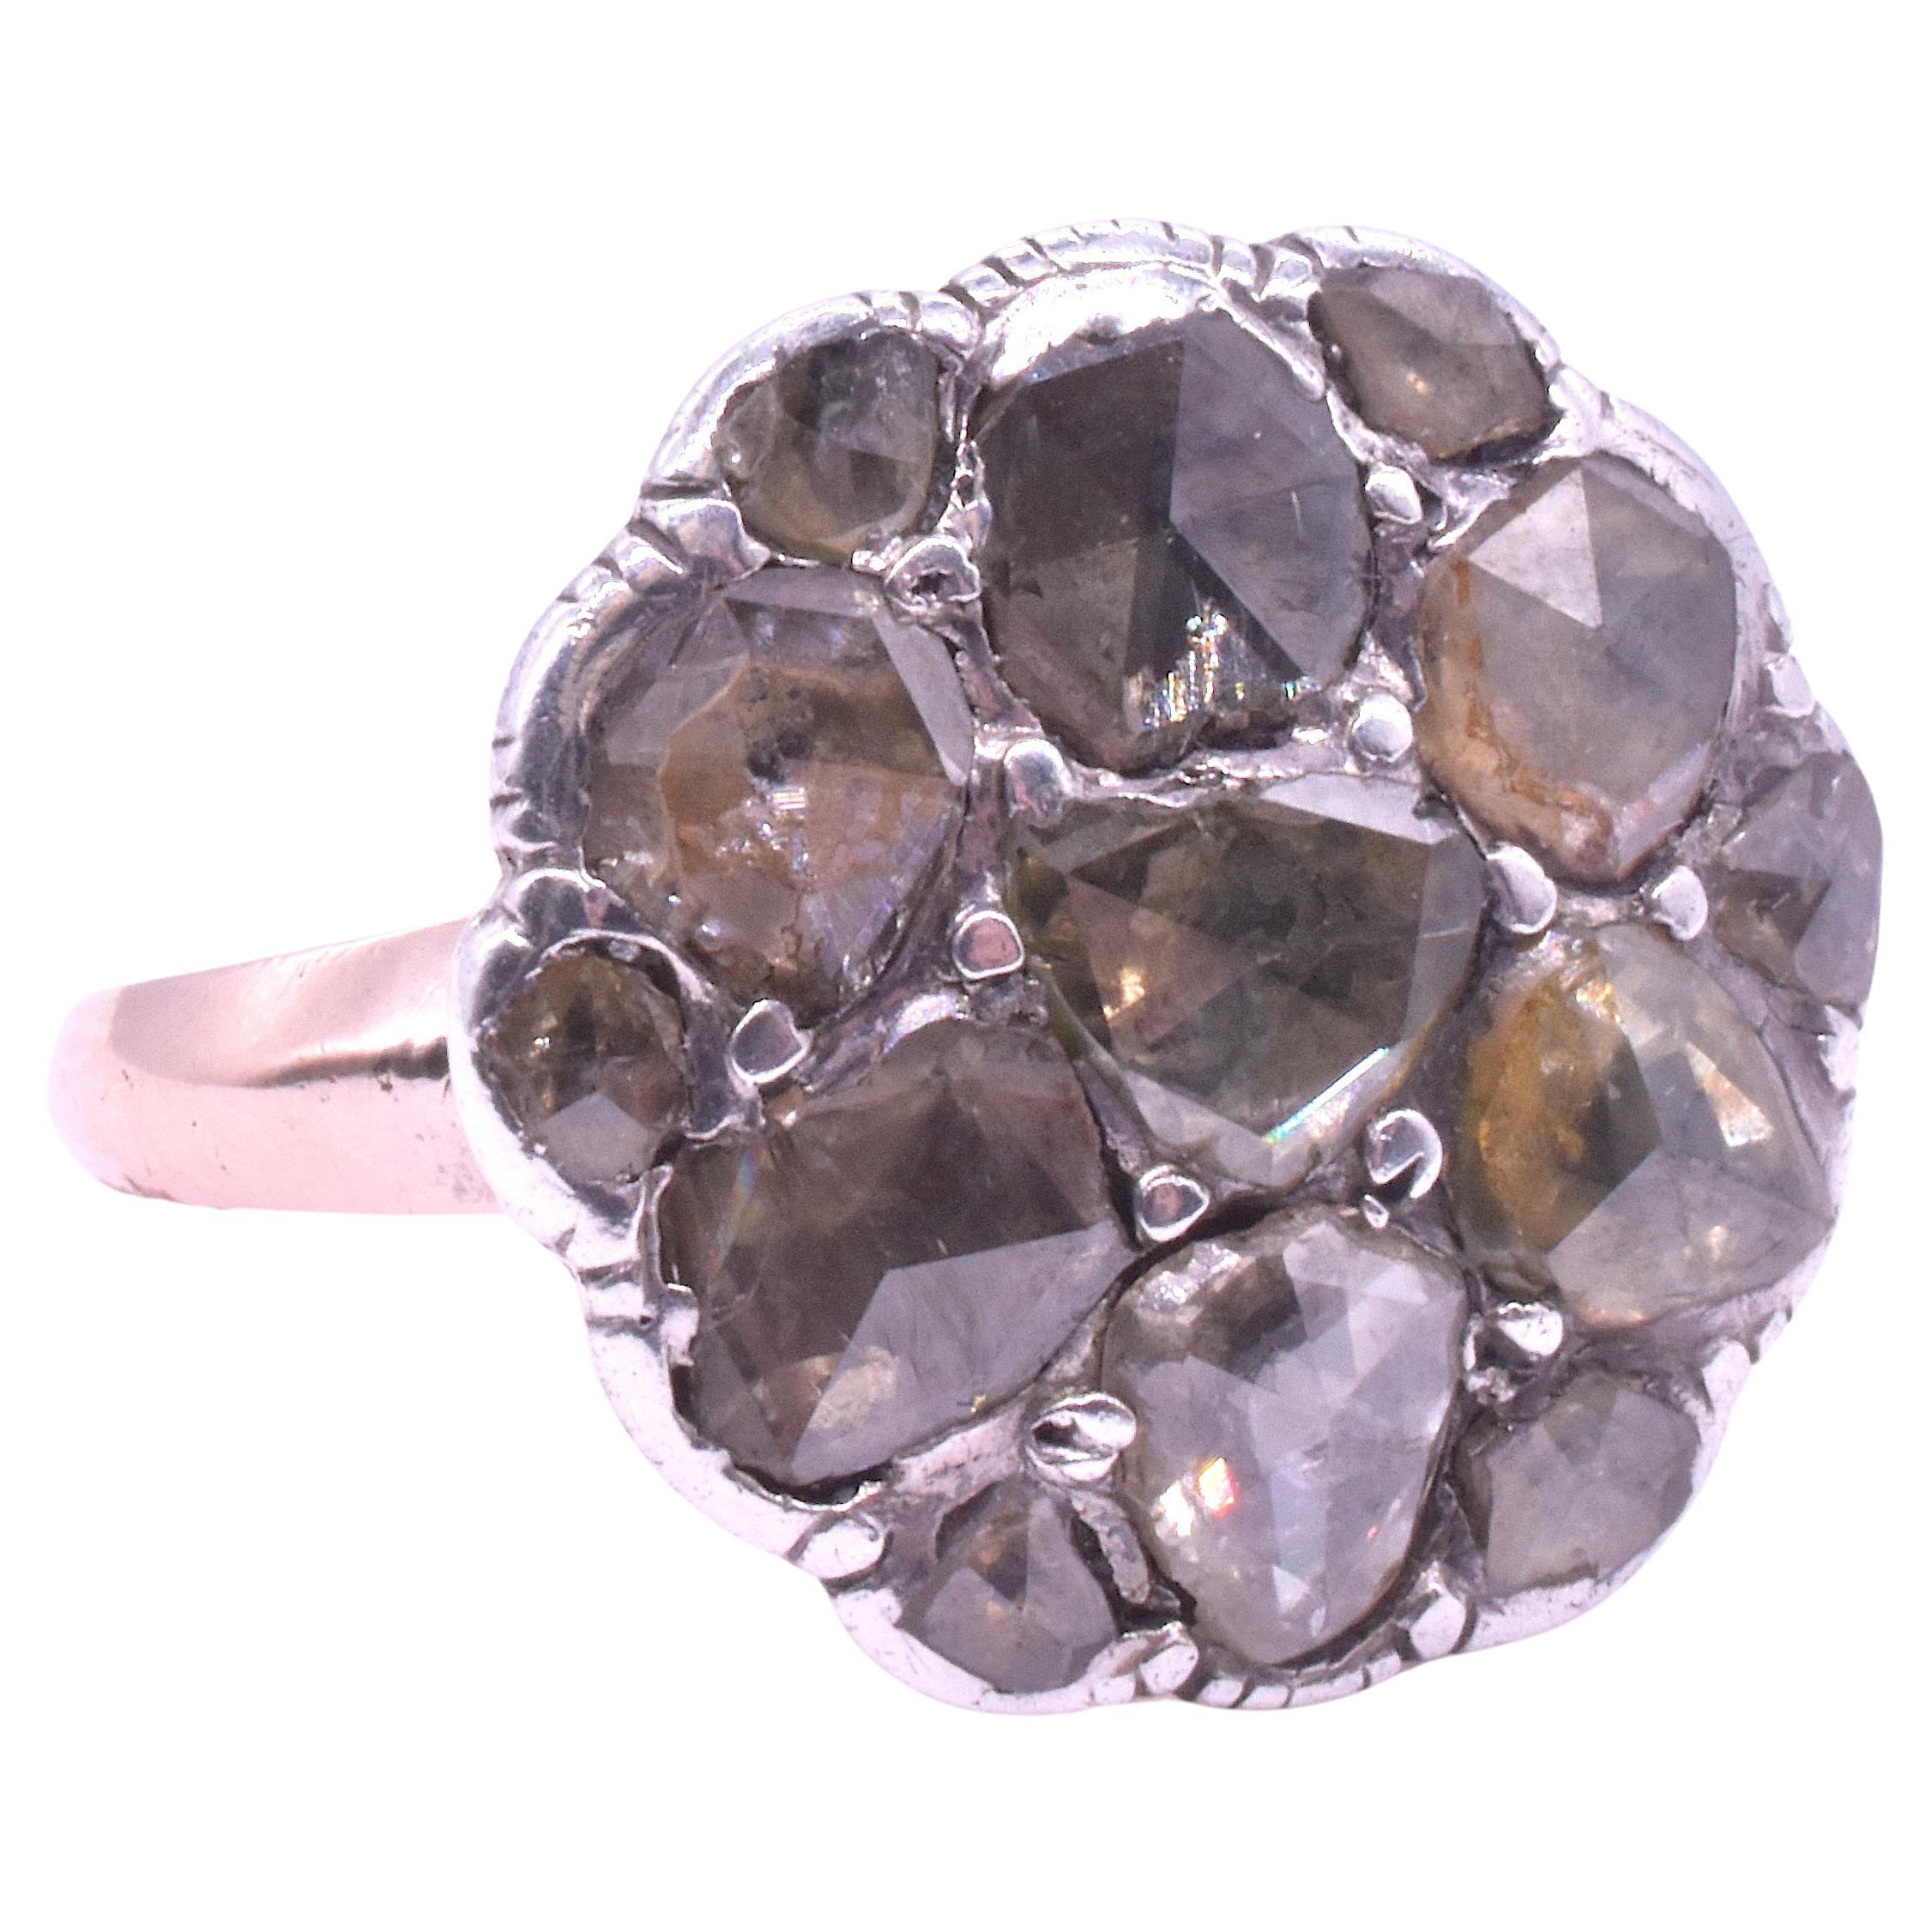 15K Rare Georgian diamond cluster ring consisting of 6  large stones cut en cabochon (no facets and polished smooth) set radially about a large center diamond.  Six smaller stones are set along the border. The border is crimped, a feature of hand